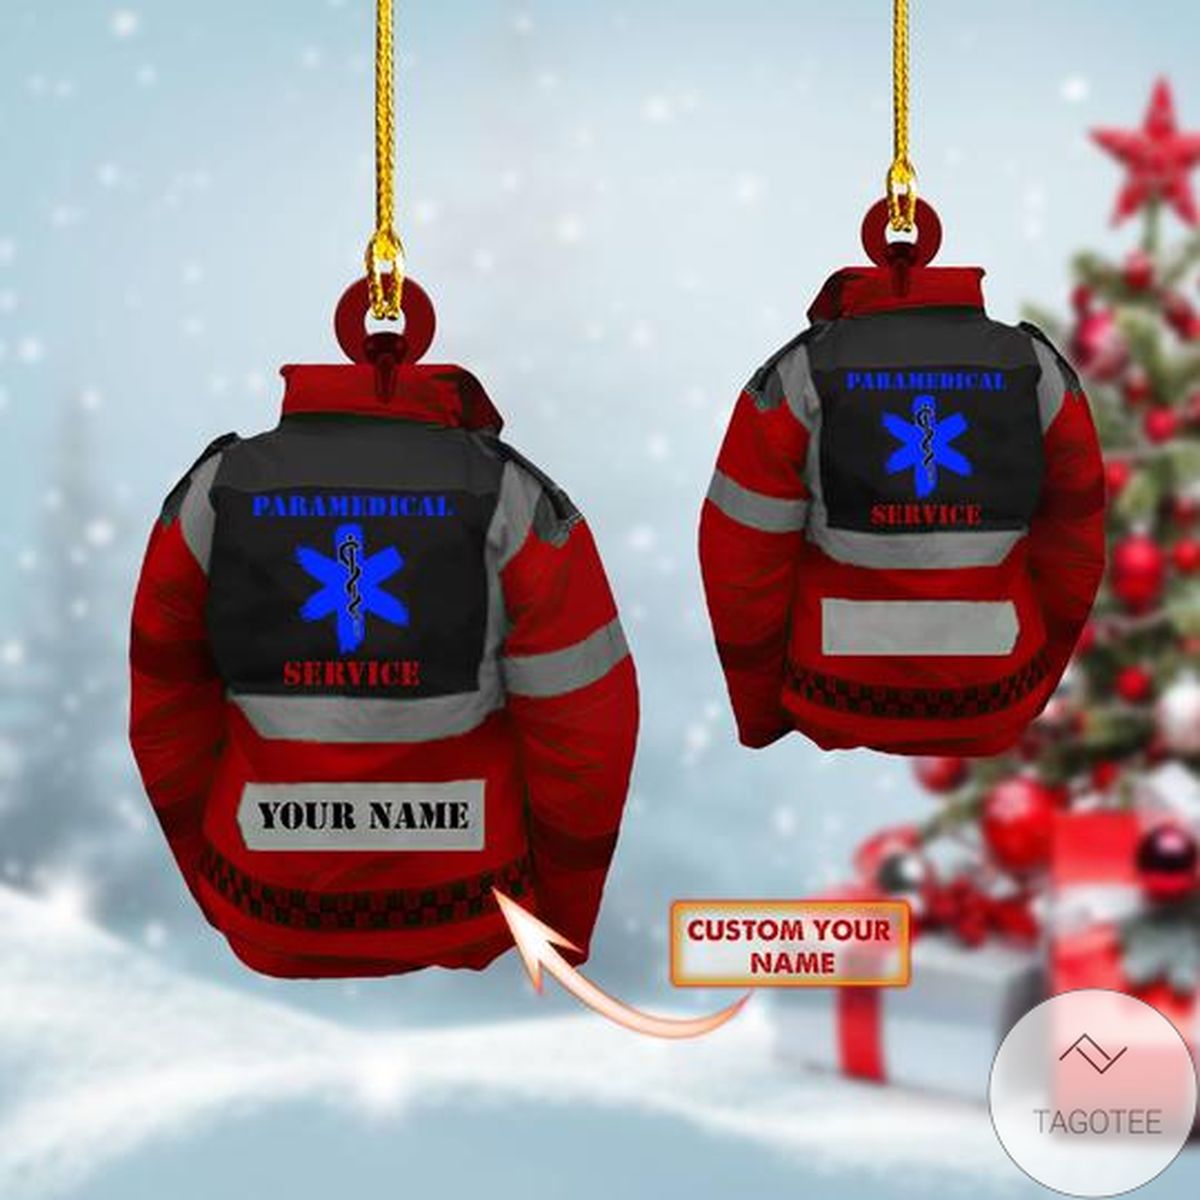 Personalized Emt Paramedic Red Shaped Ornament